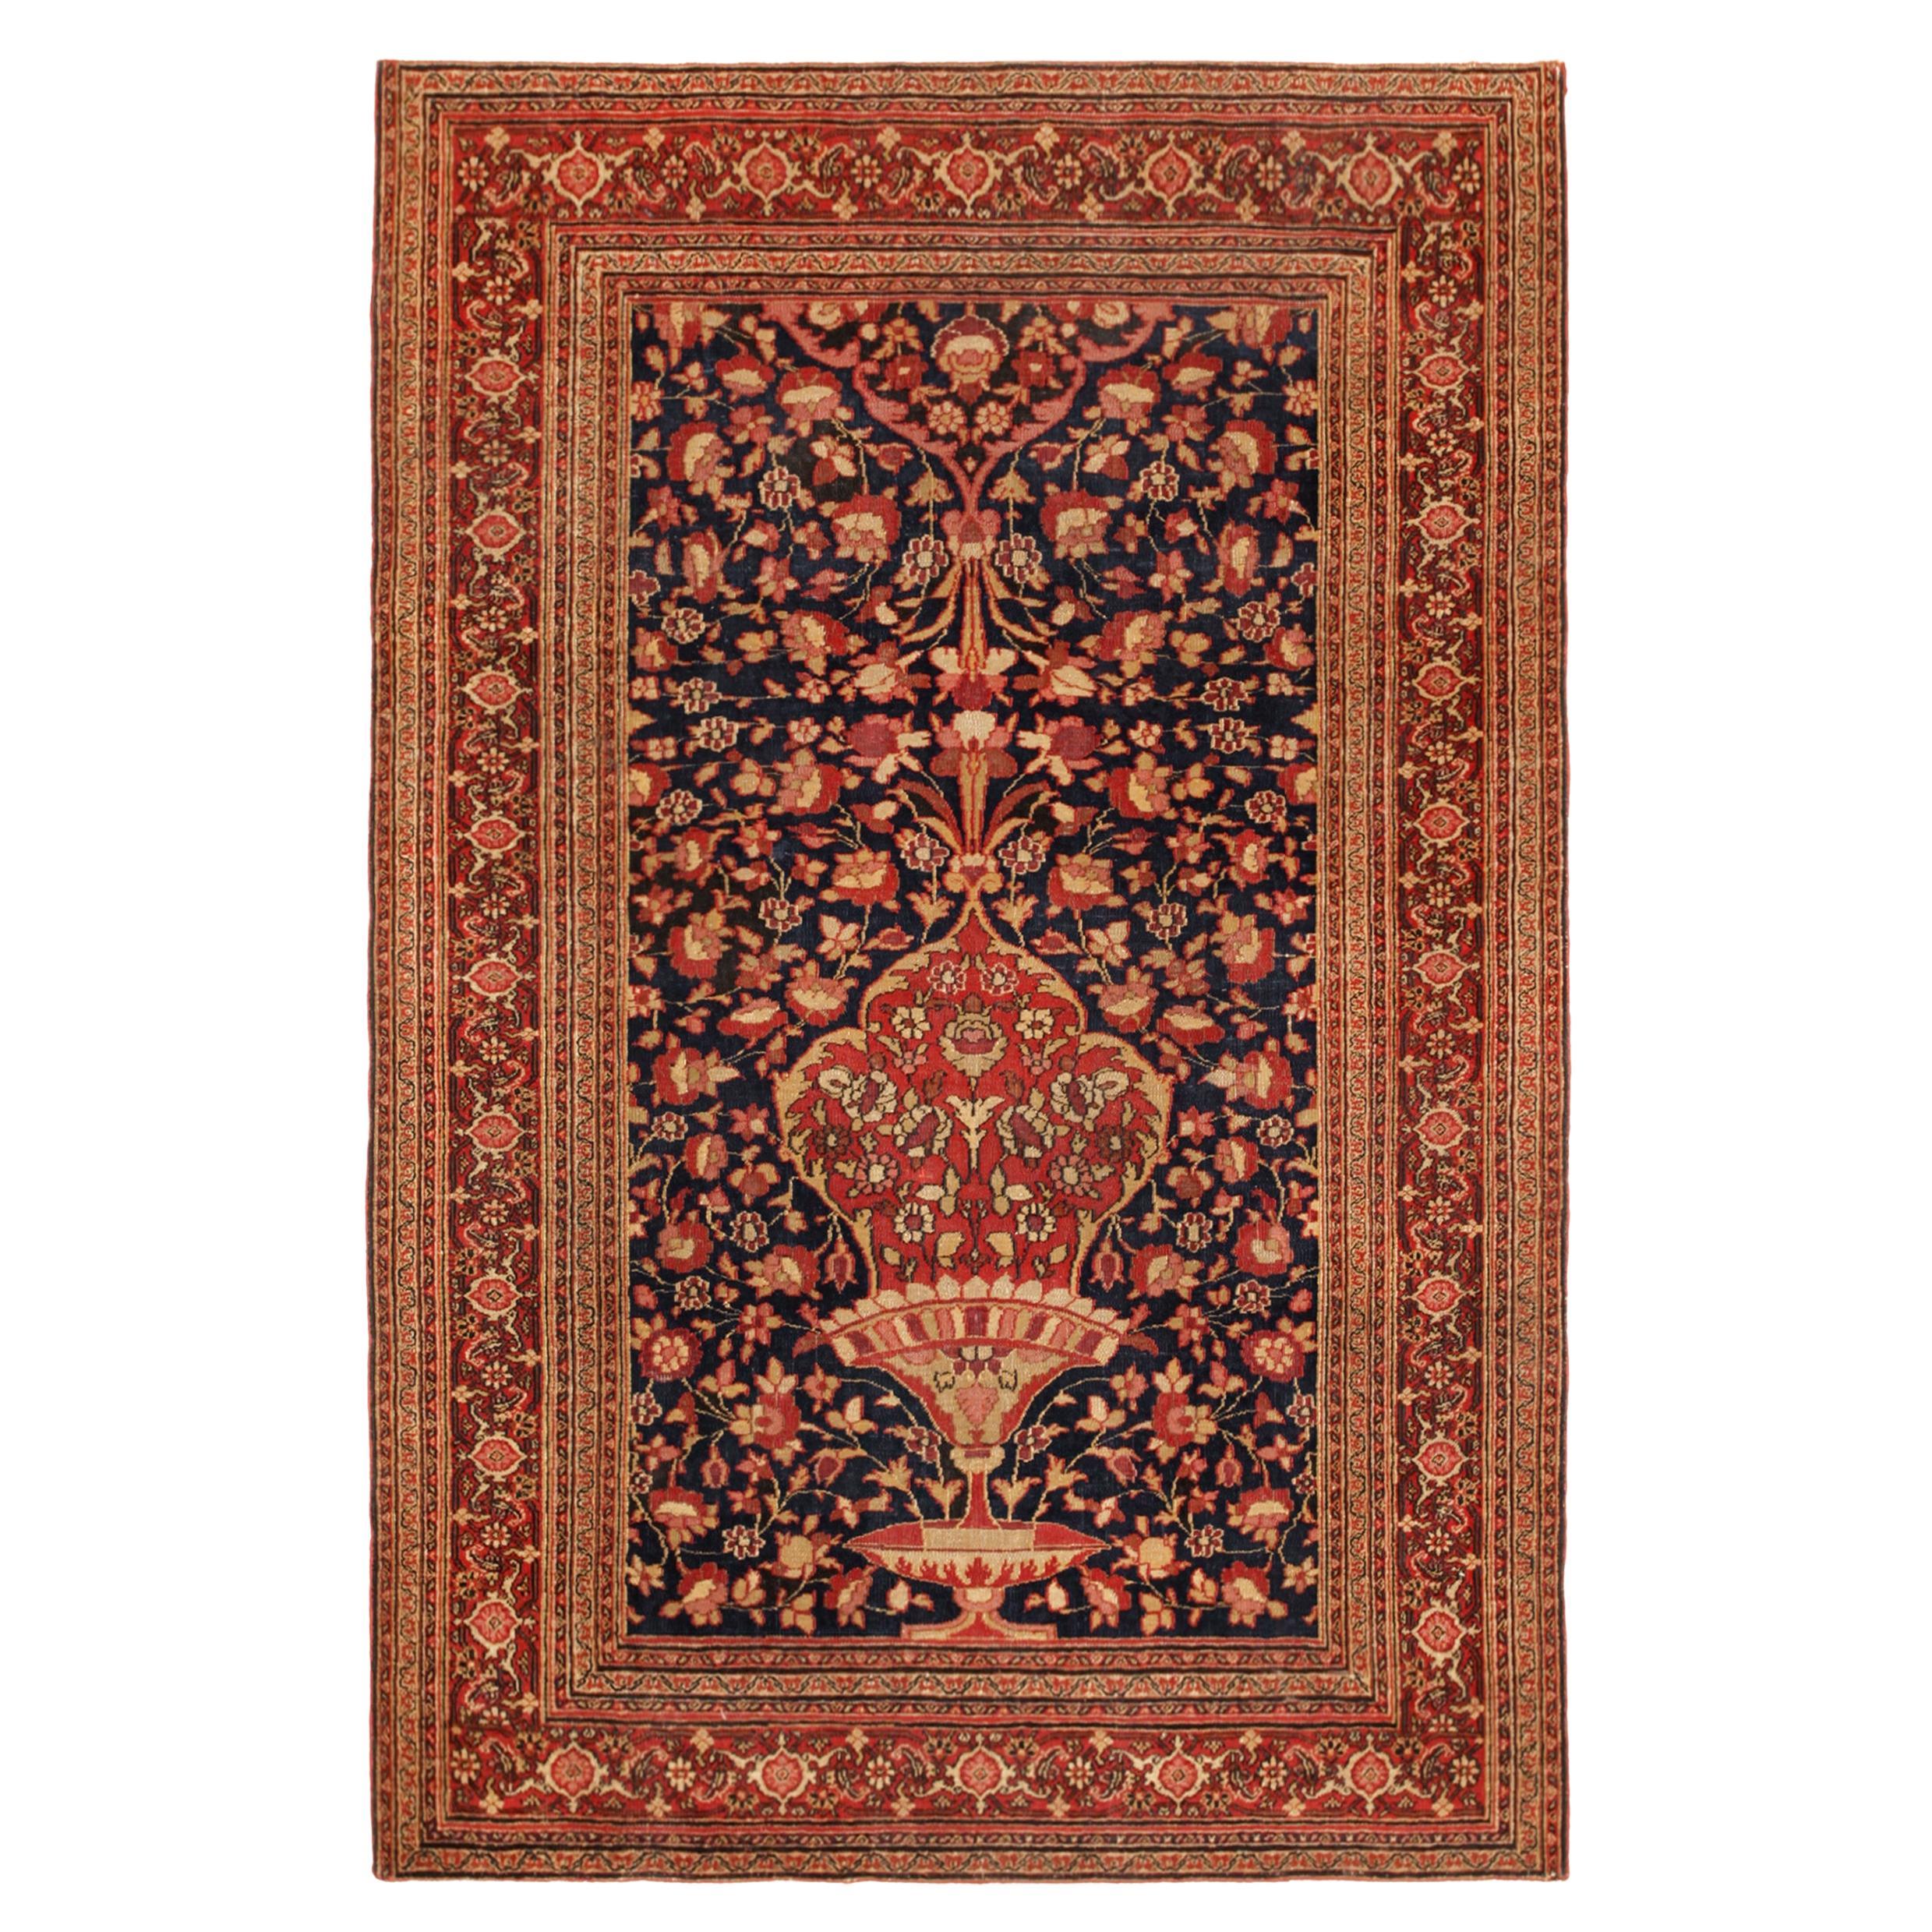 Antique Persian Khorason Oriental Rug in Small Size with Vase Design For Sale